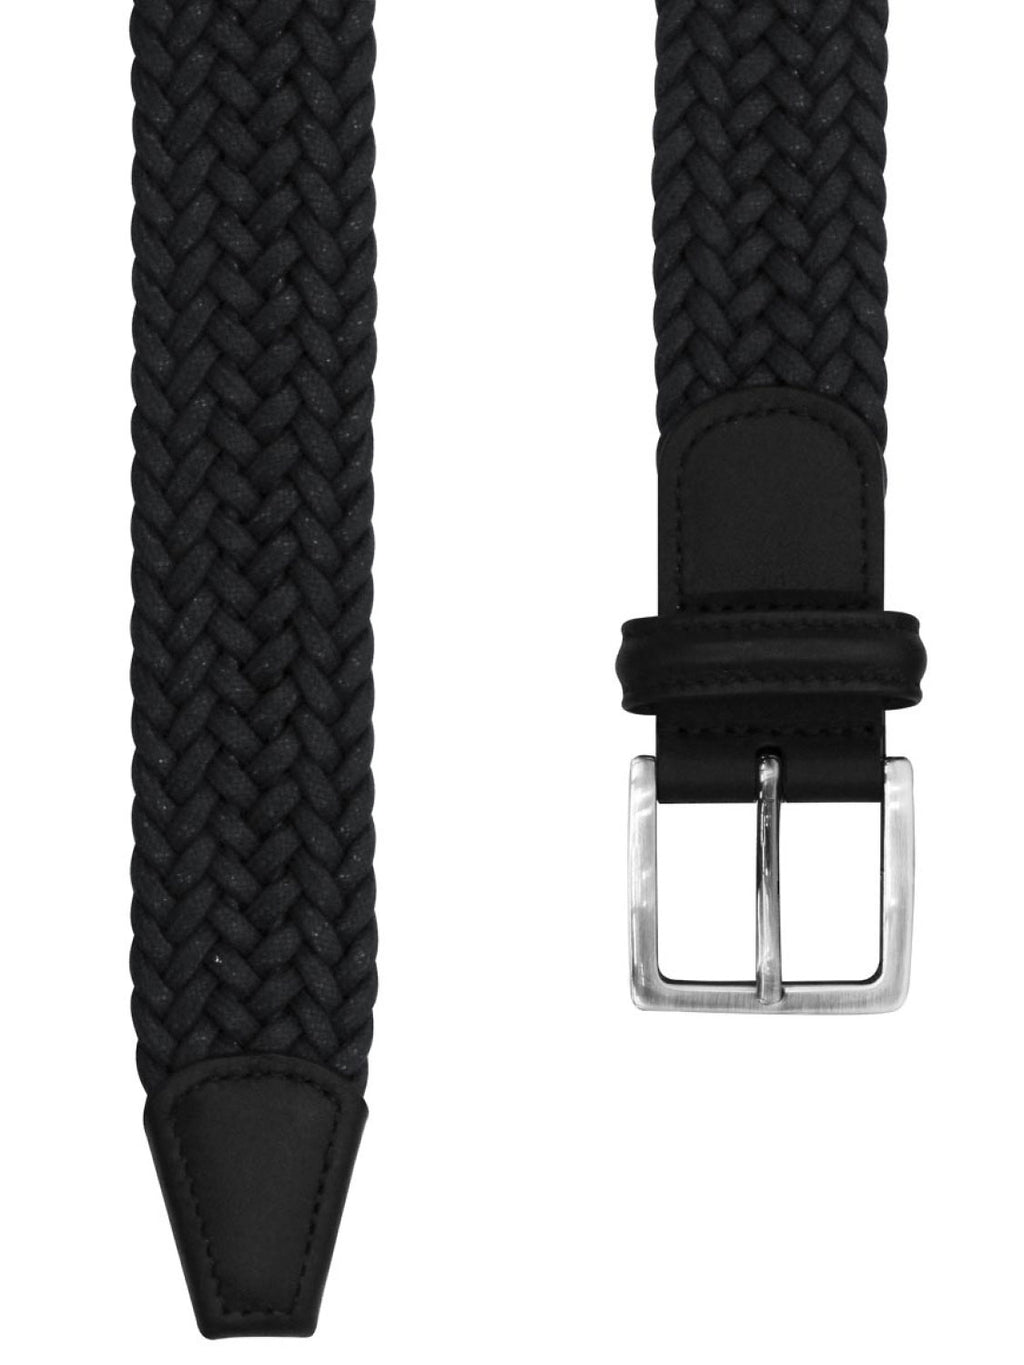 Anderson's Belt, Navy Blue Woven